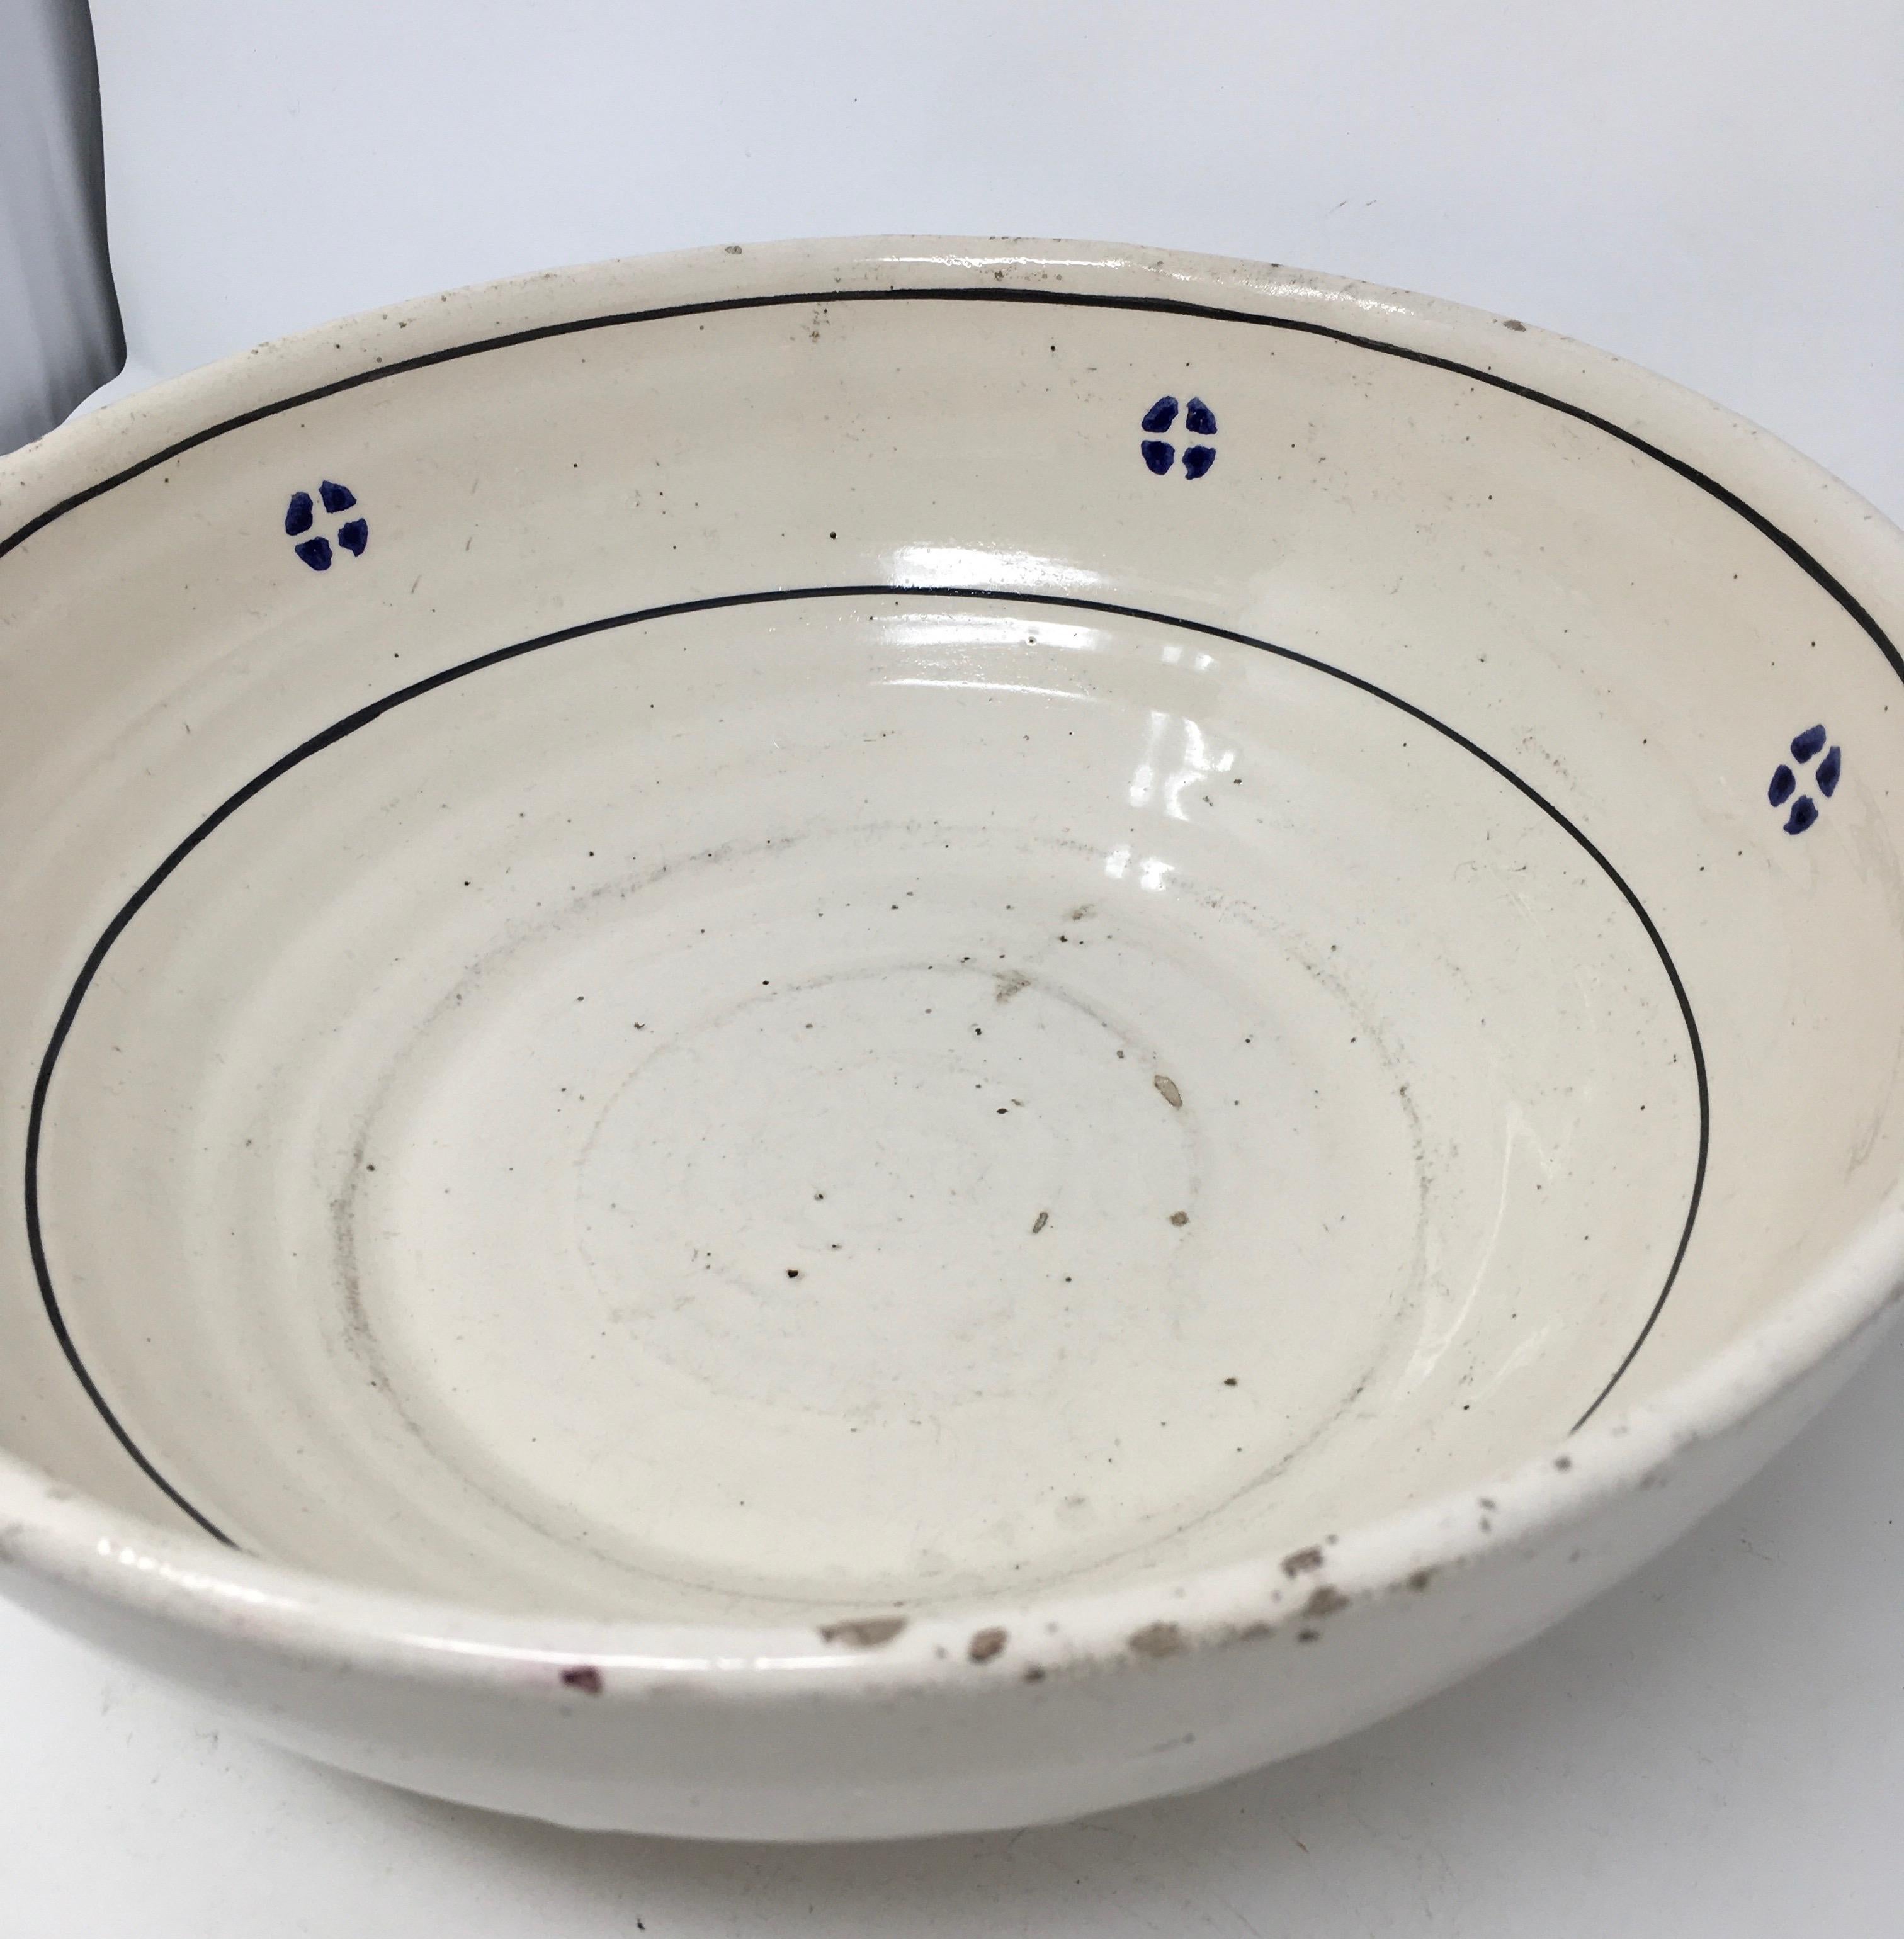 This hand painted Italian antique terracotta bowl is from the region of Puglia, Italy. The simple blue floral design around the rim is characteristic of this area. The shape is nice too. It is a bowl, but a very shallow one. This bowl shows wear